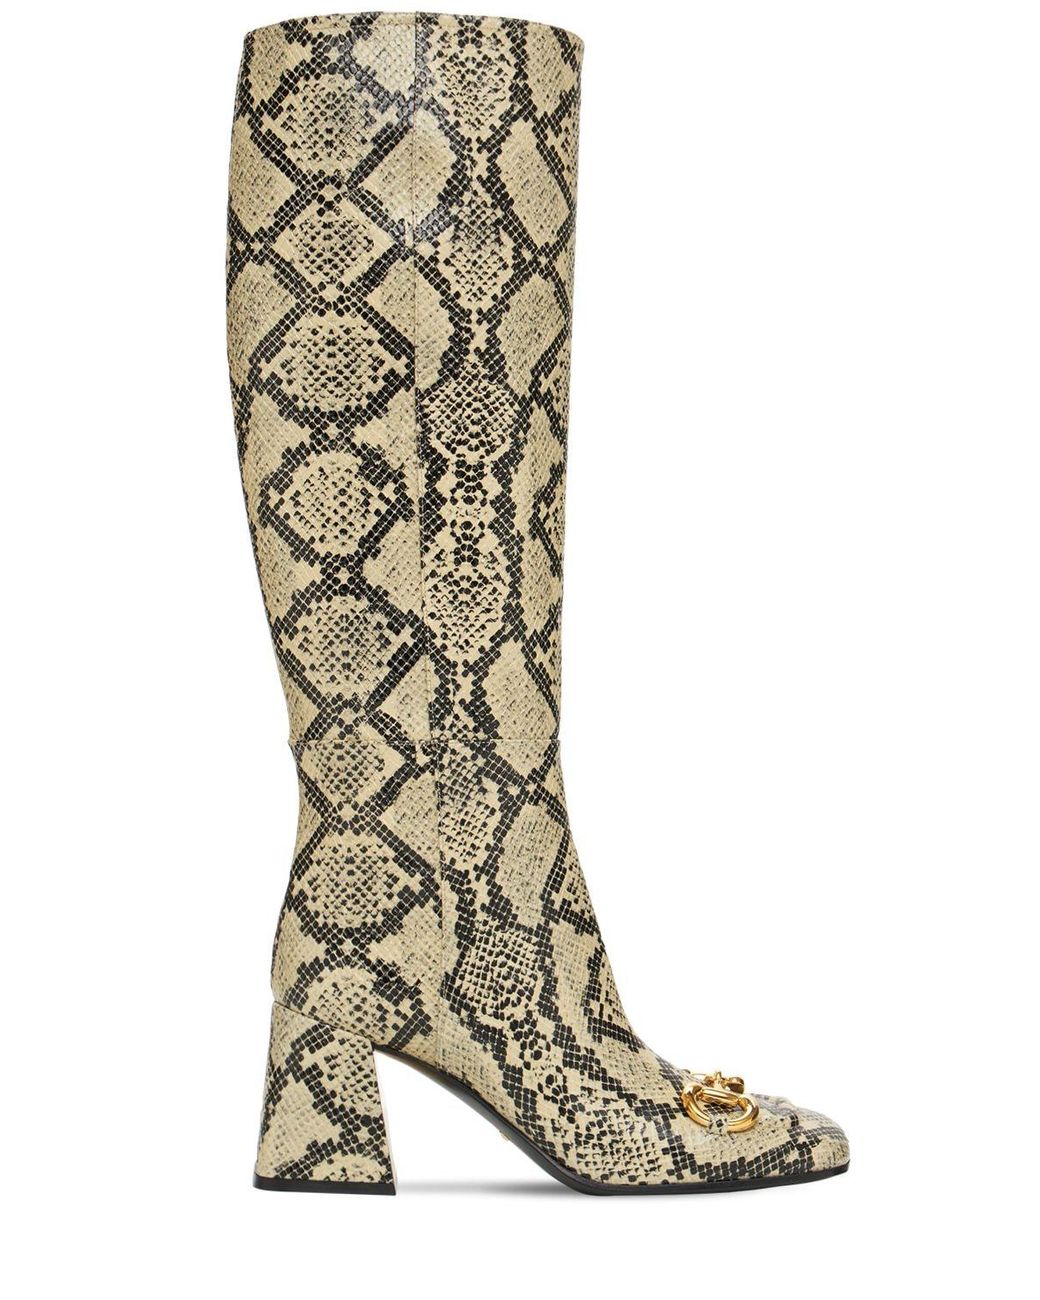 Gucci 75mm Python Print Leather Tall Boots - Lyst